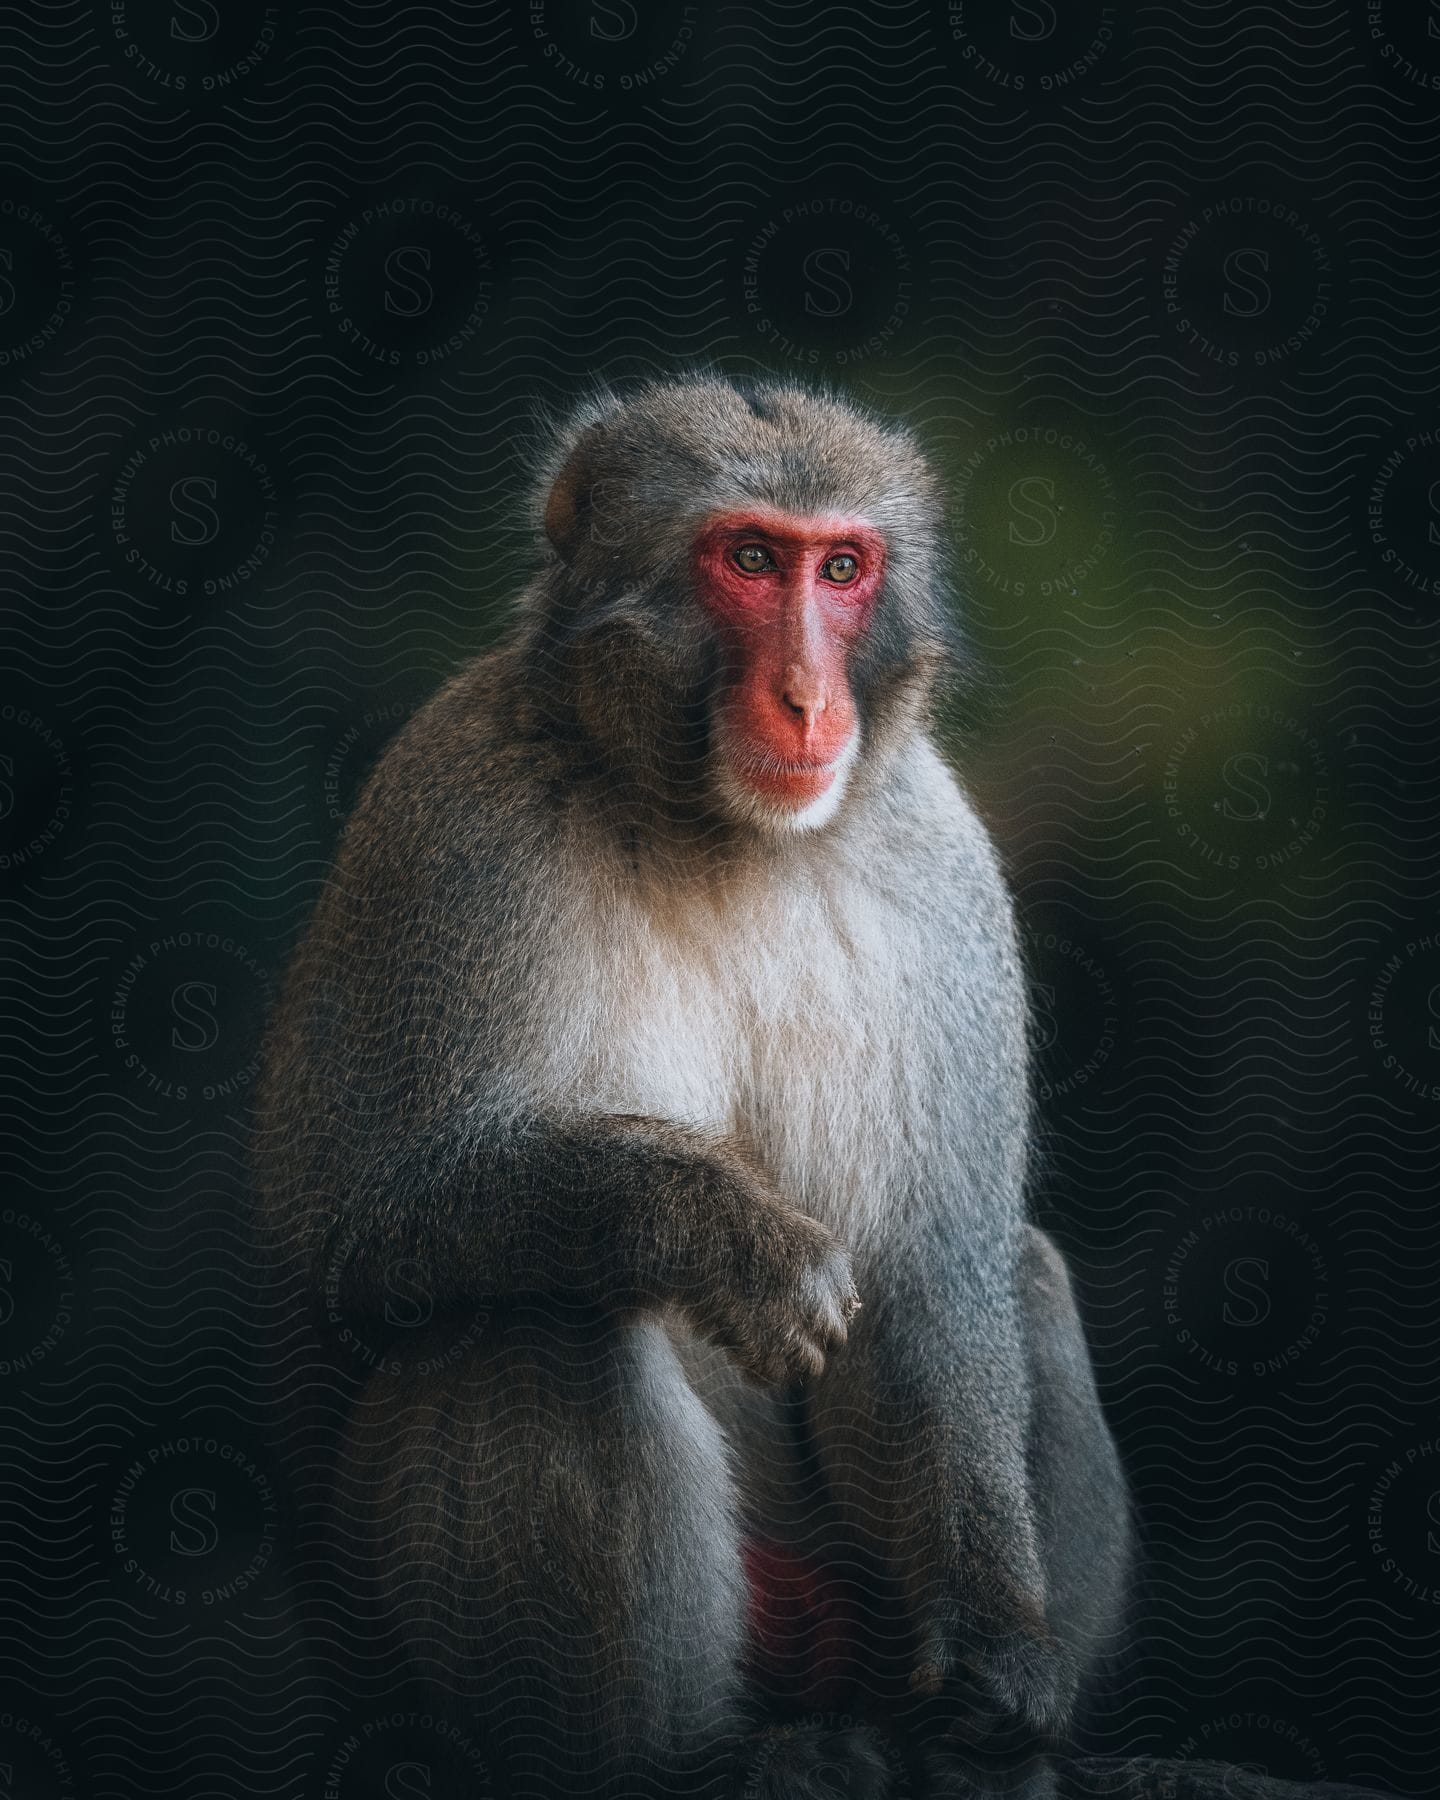 A macaque monkey sitting in the wilderness looking to the right